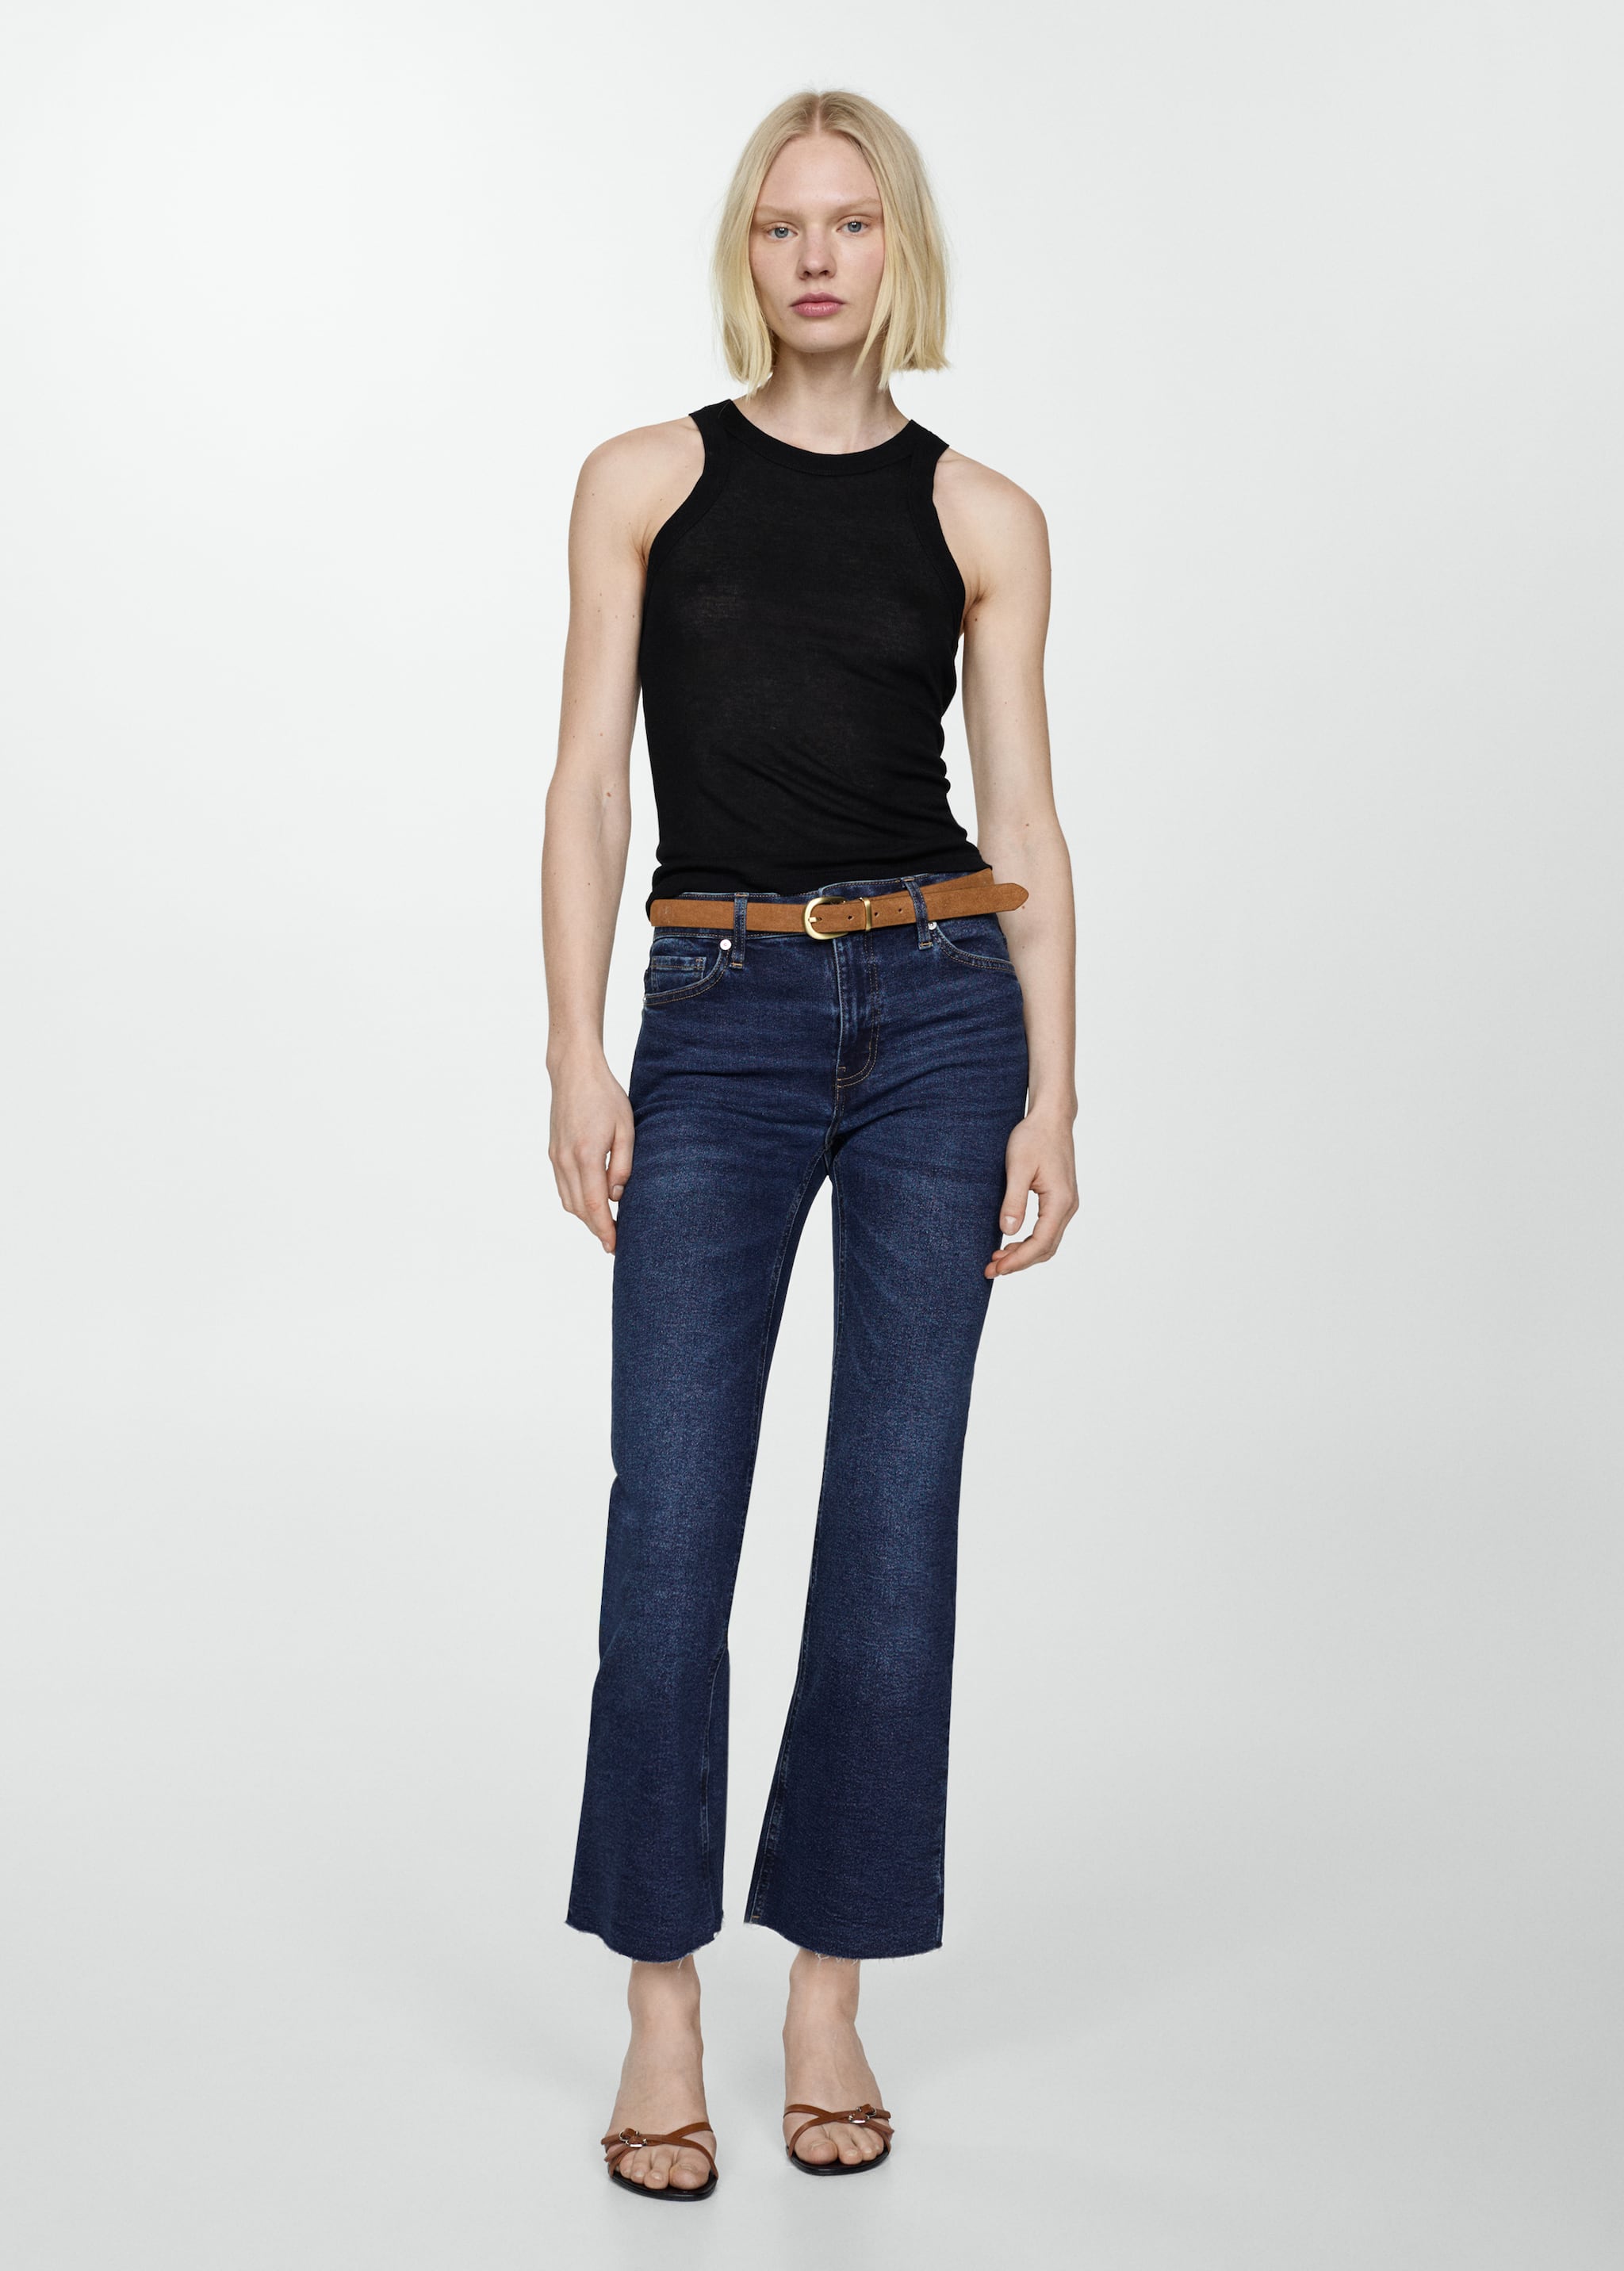 Jeans flare crop - Plano general